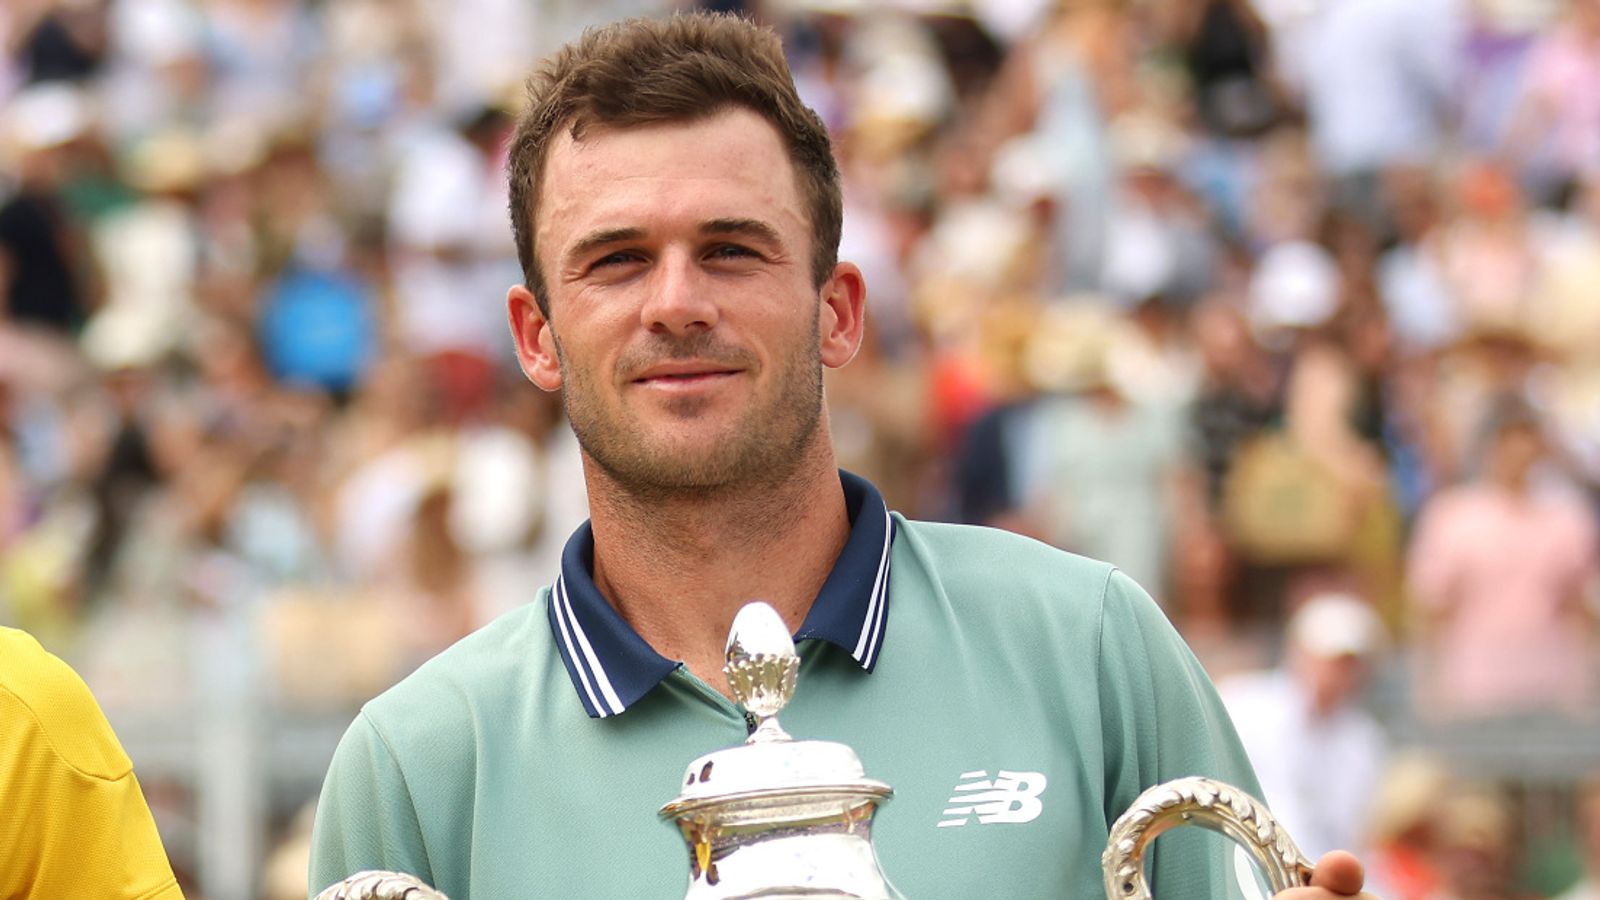 Final at the Queen’s Club: Tommy Paul beats Lorenzo Musetti and follows in the footsteps of Americans John McEnroe, Jimmy Connors and Pete Sampras | Tennis News